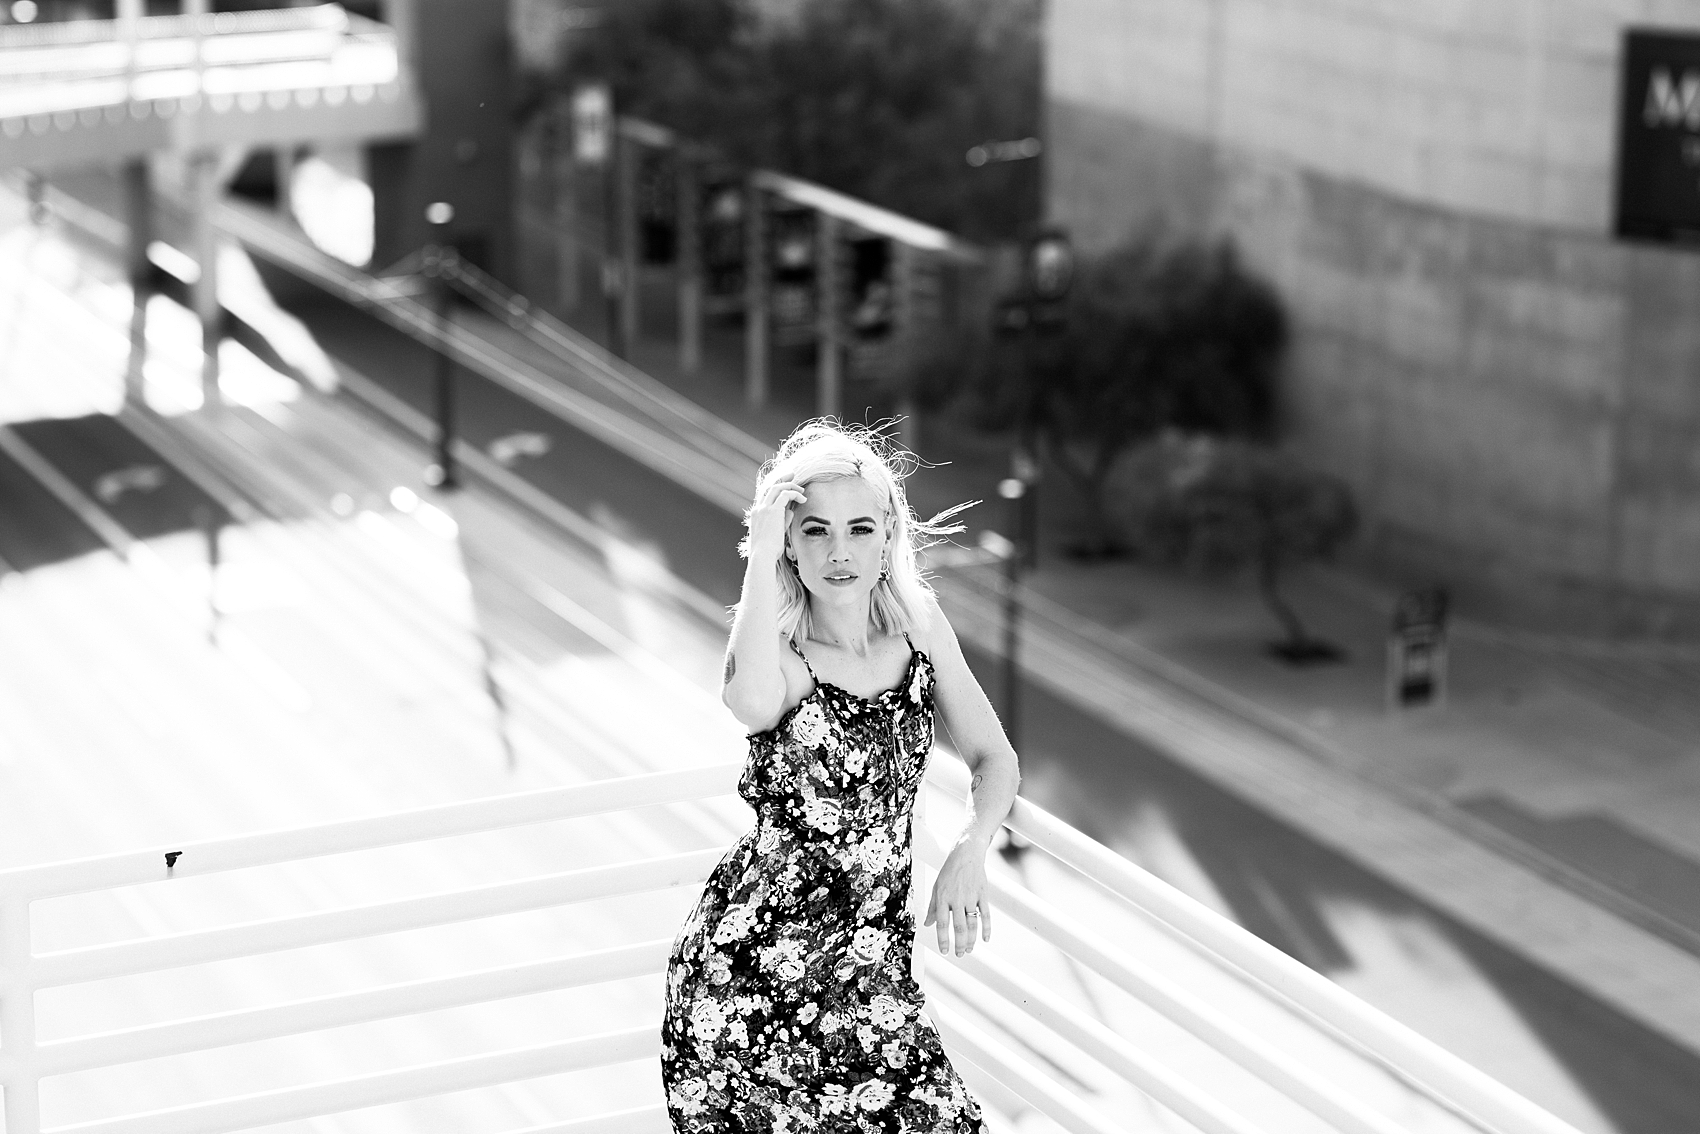 Leah Hope Photography | Downtown Phoenix Arizona Science Center Rooftop Fashion Modeling Pictures